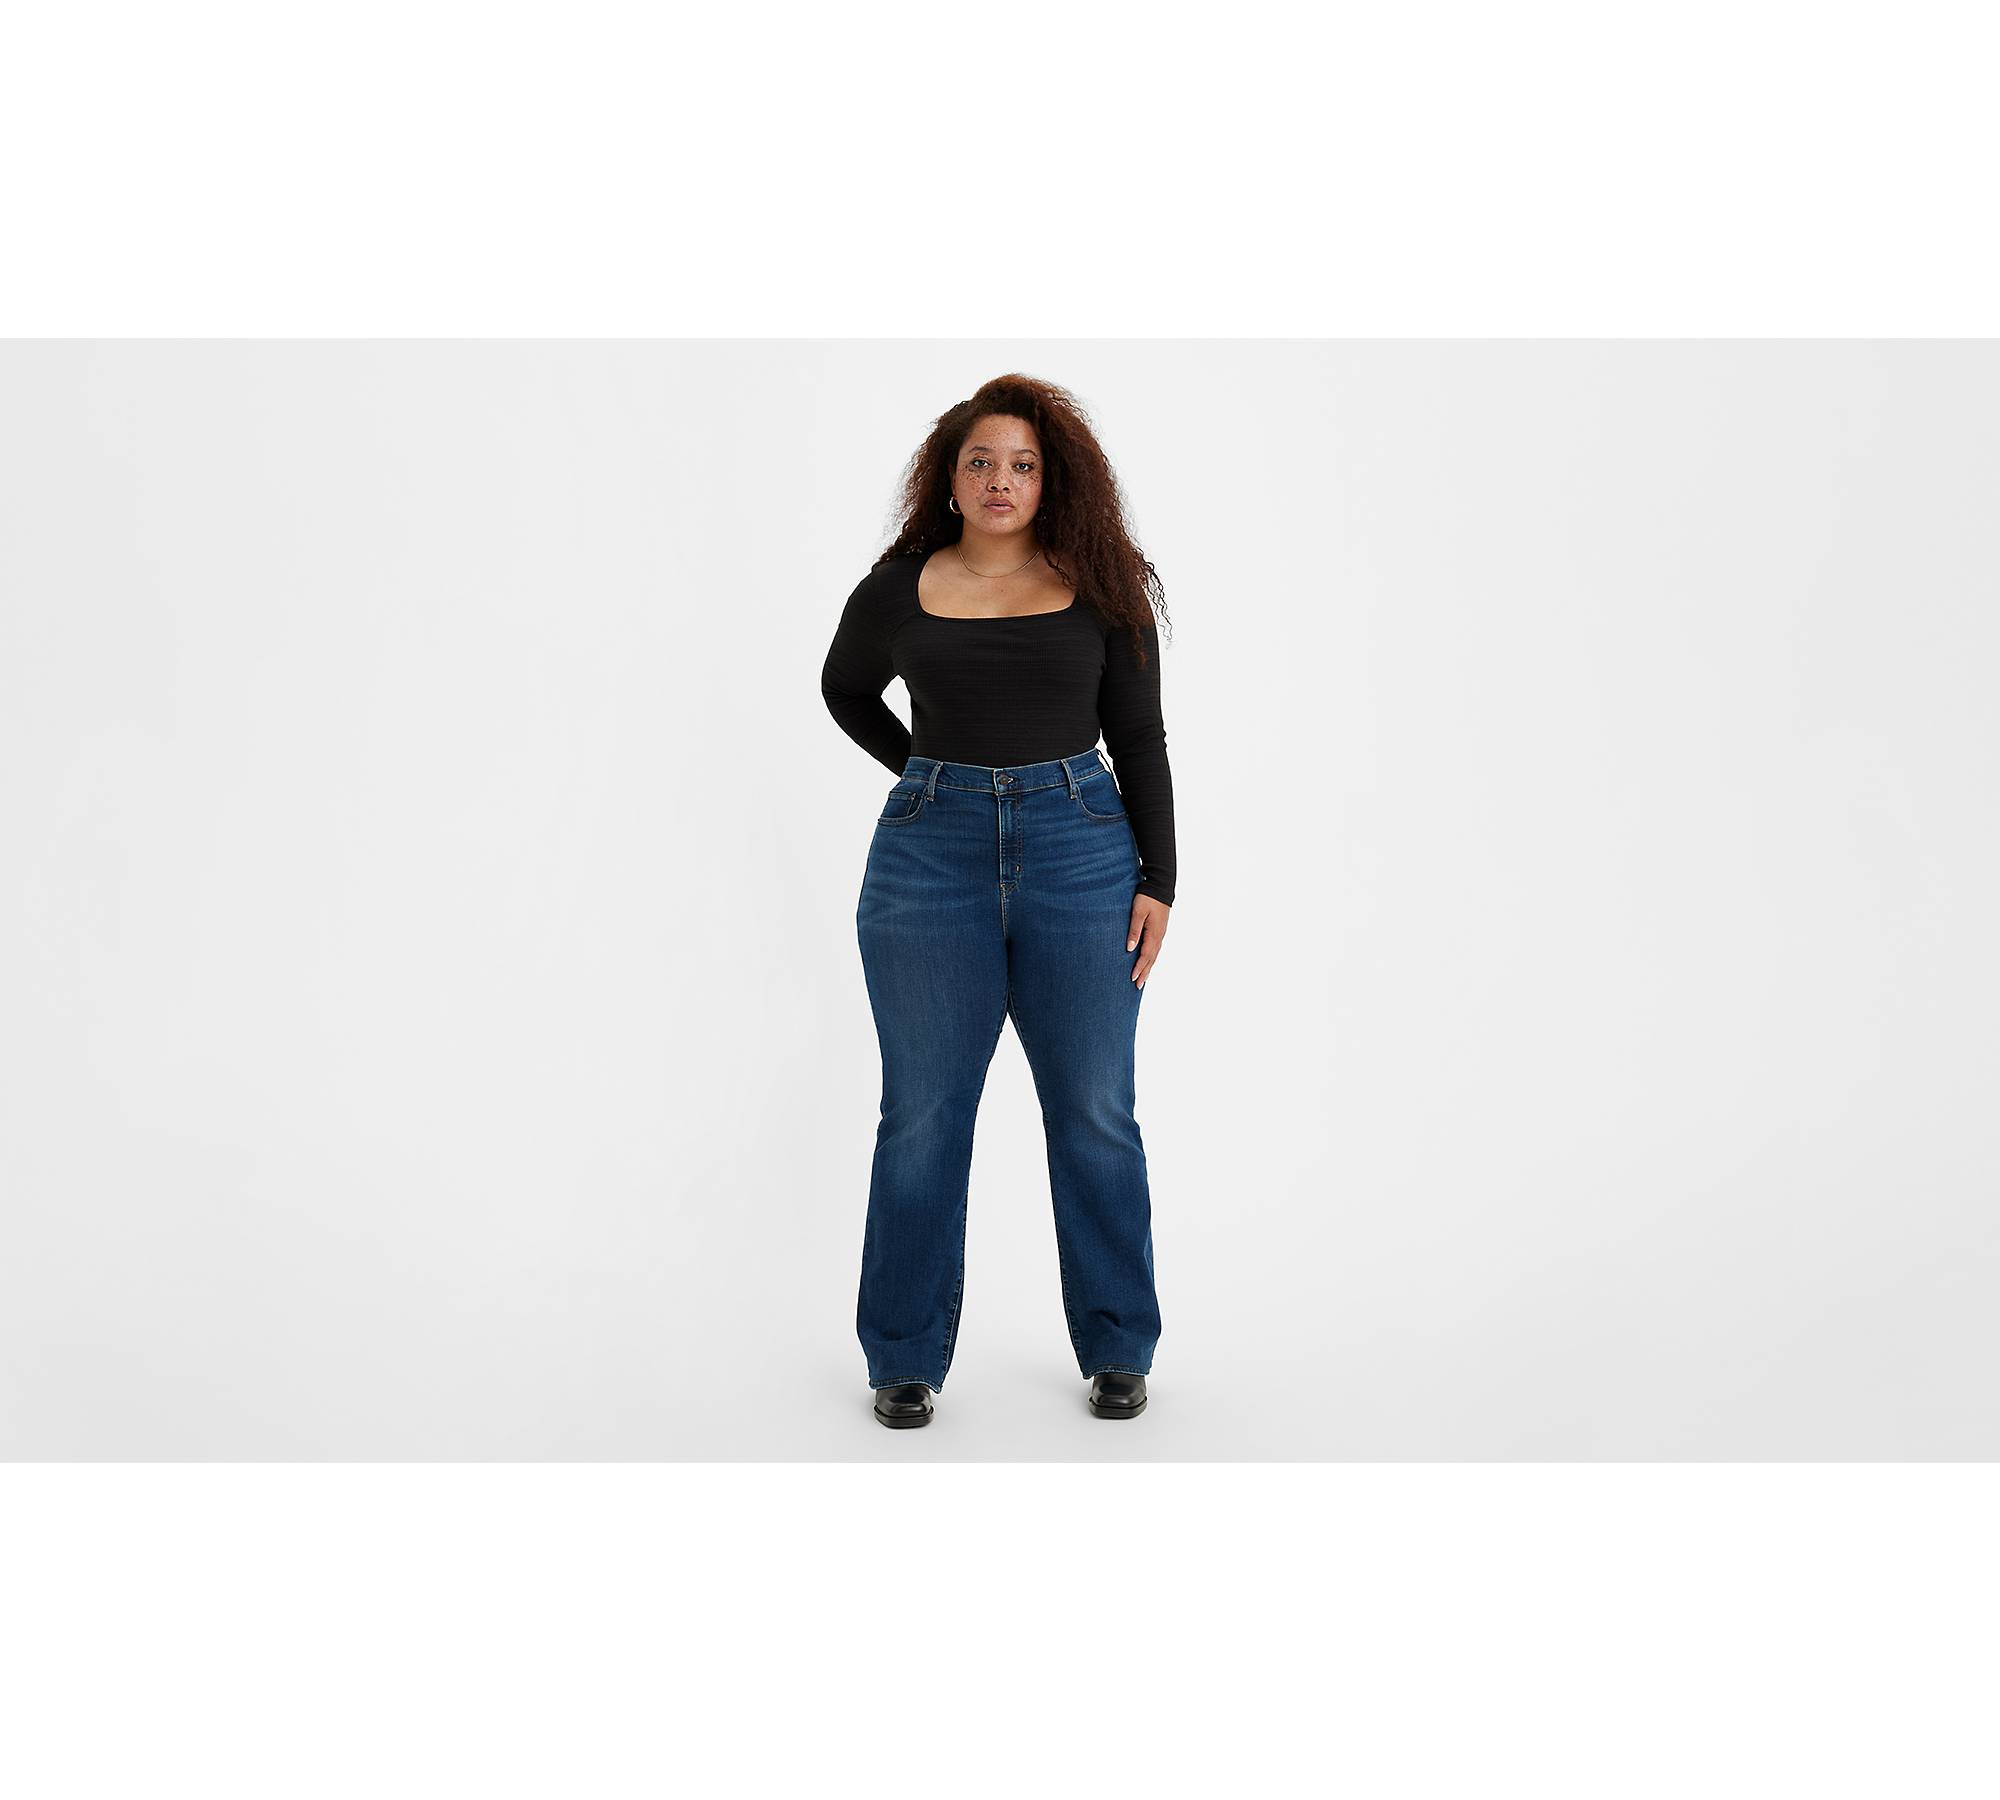 BUBBLELIME 29313335 4 Styles Womens High Waist Bootcut Yoga Pants - Out  Pockets_Navy M-31 Inseam